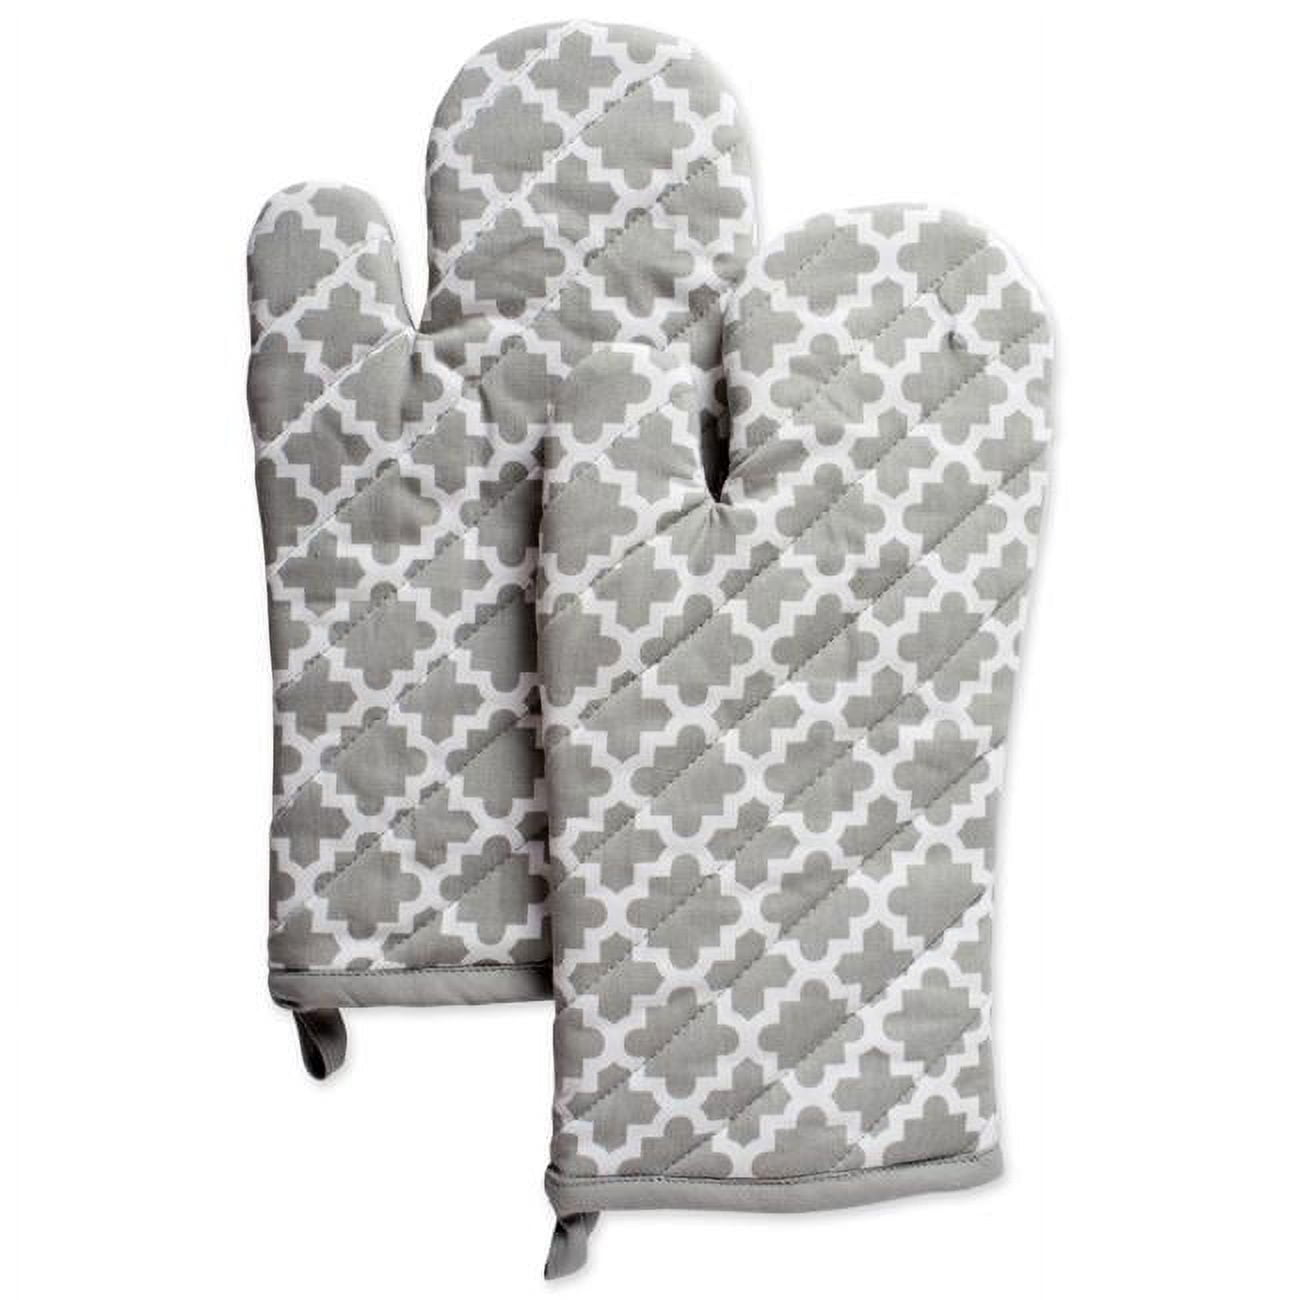 Nautica Grey 100% Cotton Mini Oven Mitts with Silicone Palm (Set of 2)